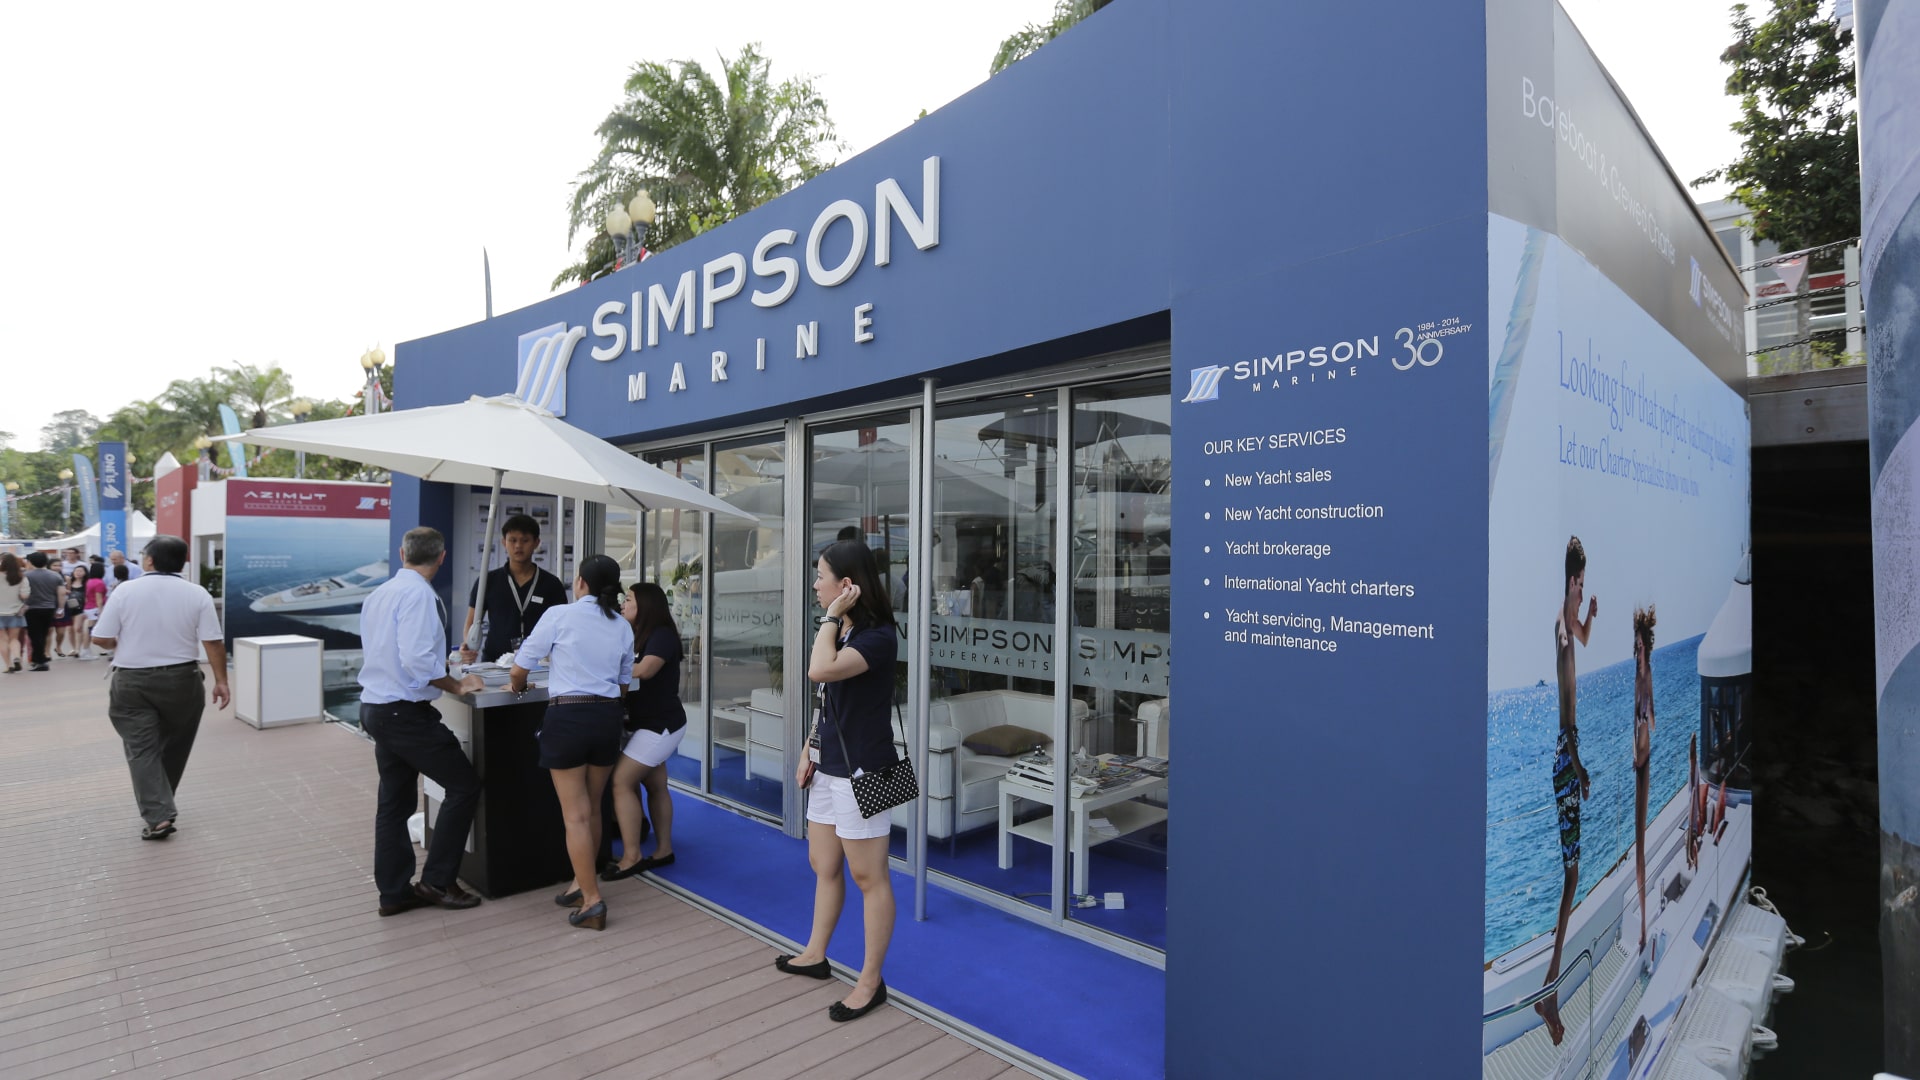 tsc_opt-images_tubelar-system_singapore-yacht-show-floating-showrooms-1920x1080-02-min